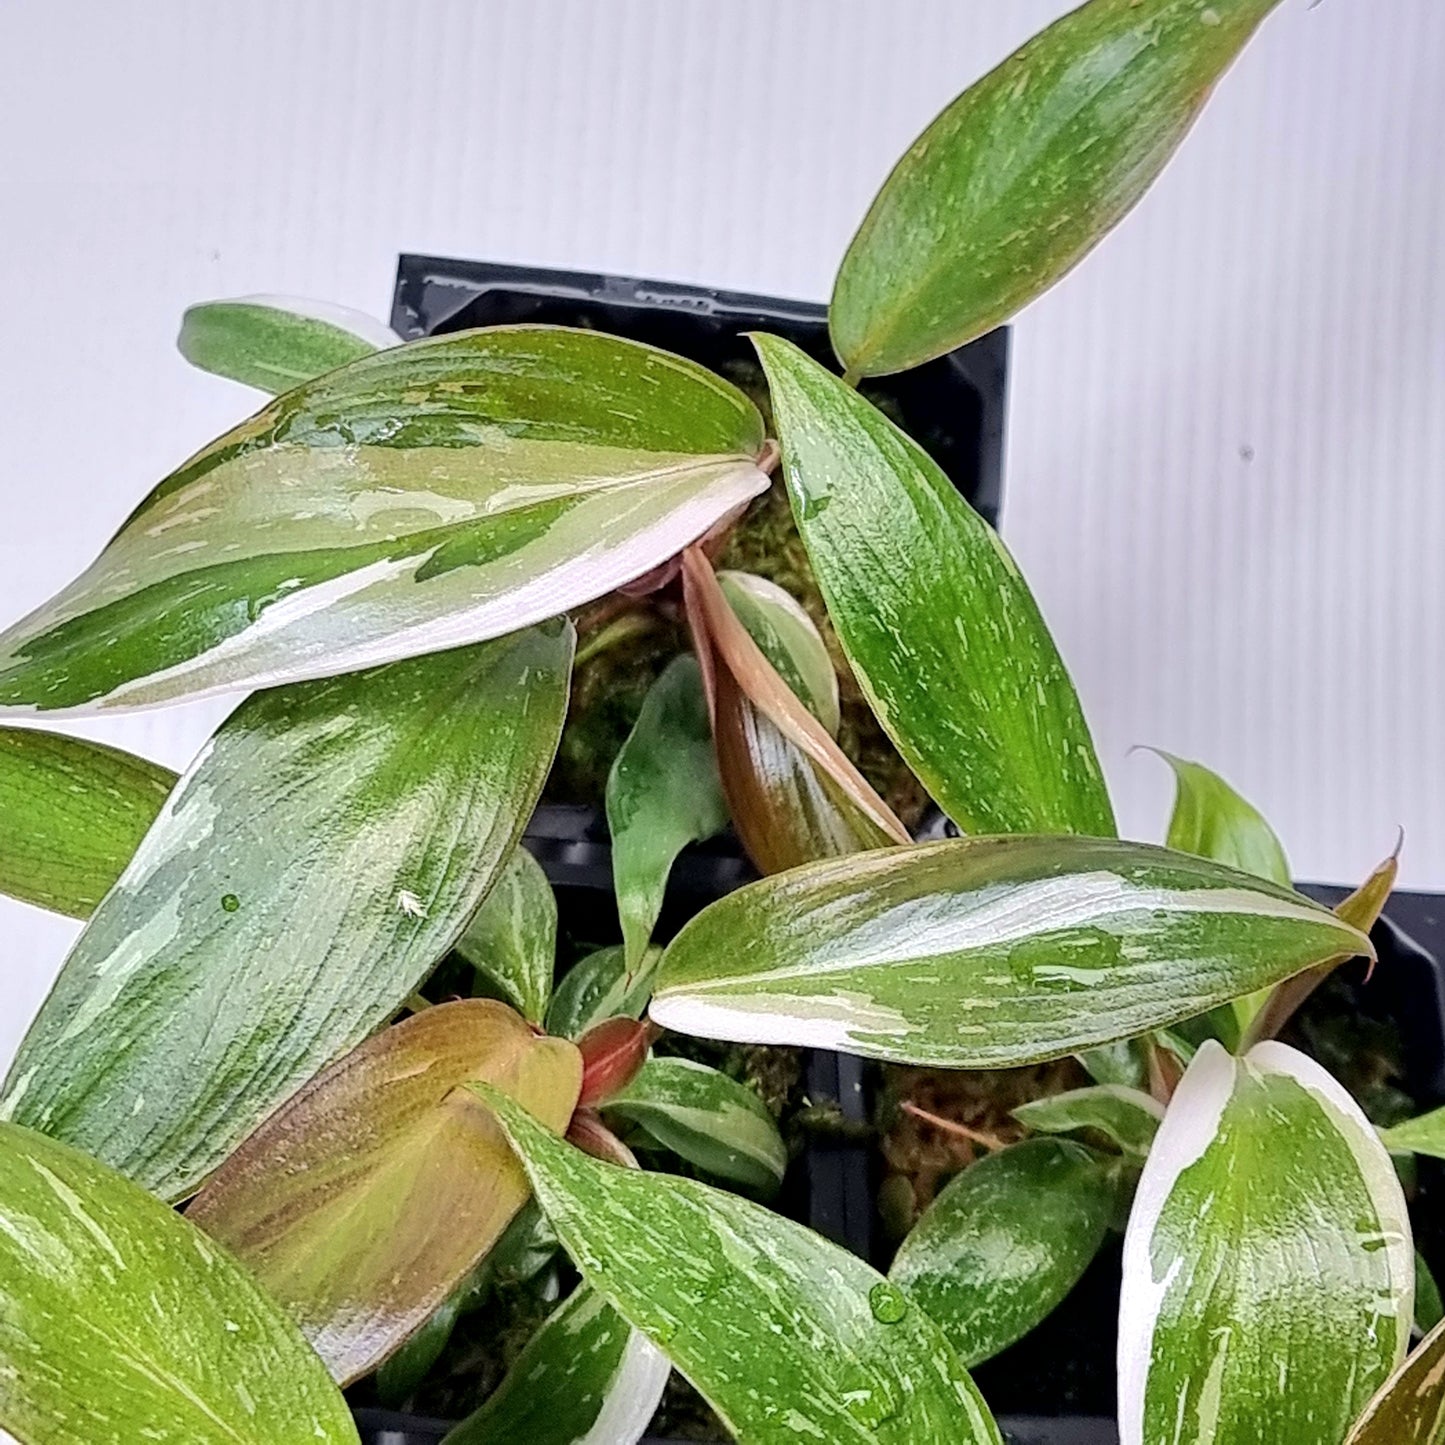 rare Philodendron Red Anderson variegated for sale in Perth Australia